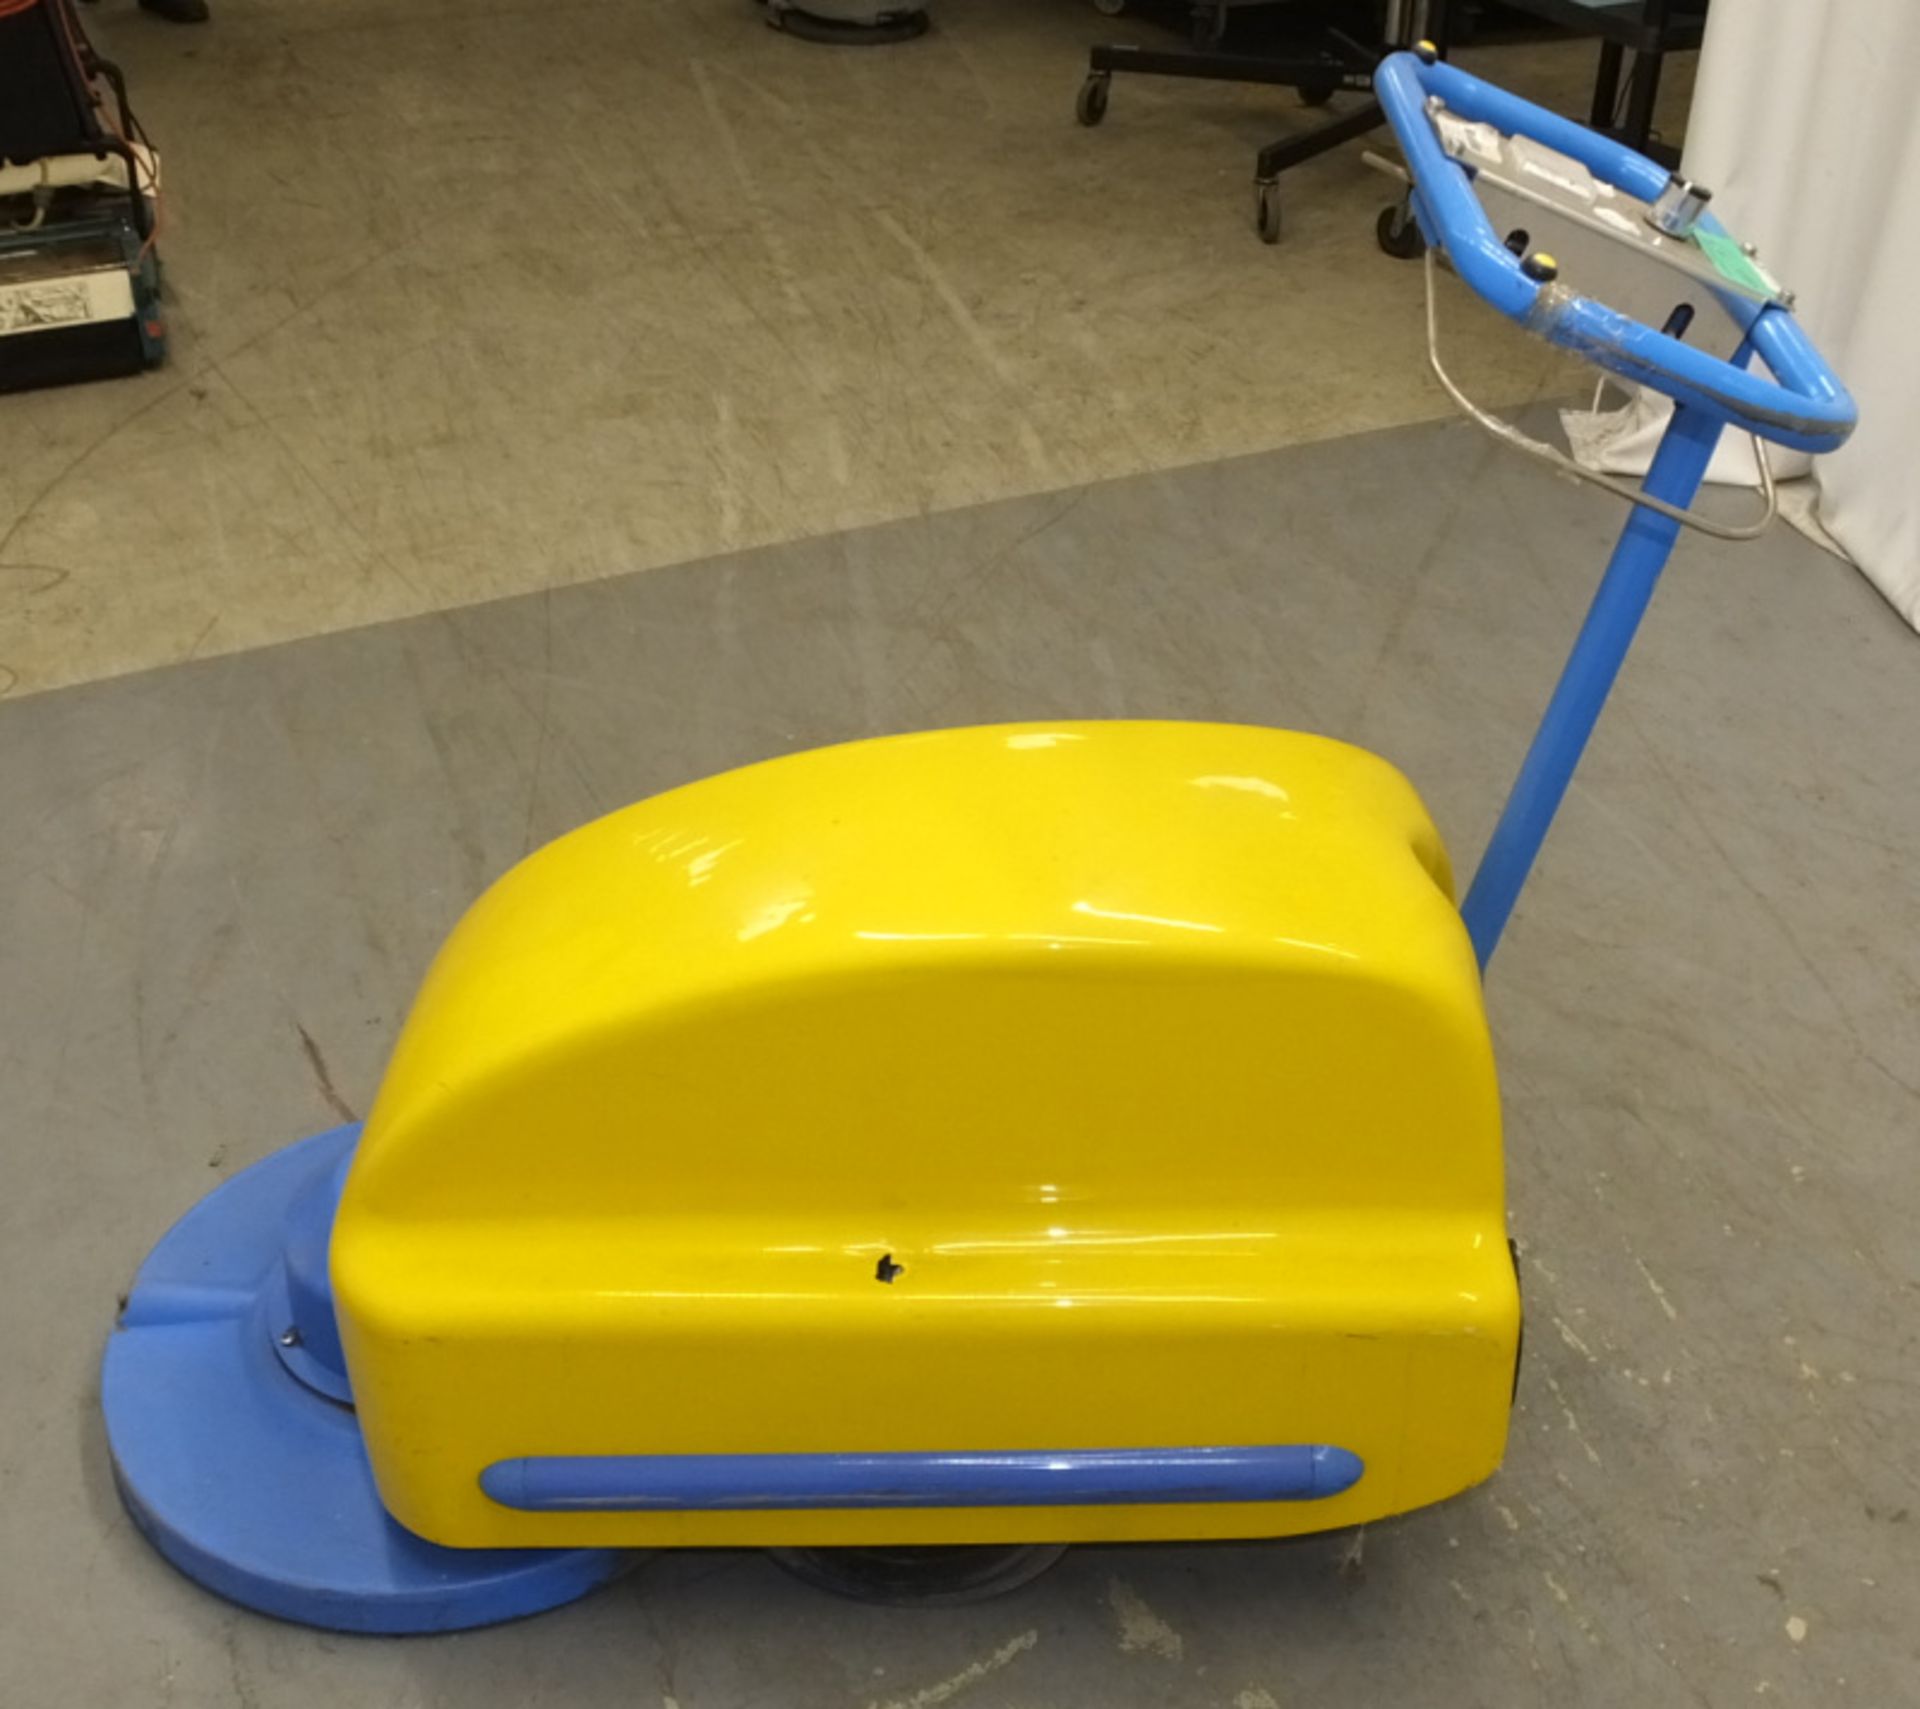 Tennant Challenger Nippy 500 Walk-Behind Floor Cleaner - no key - cracked casing as seen in pictures - Image 4 of 9